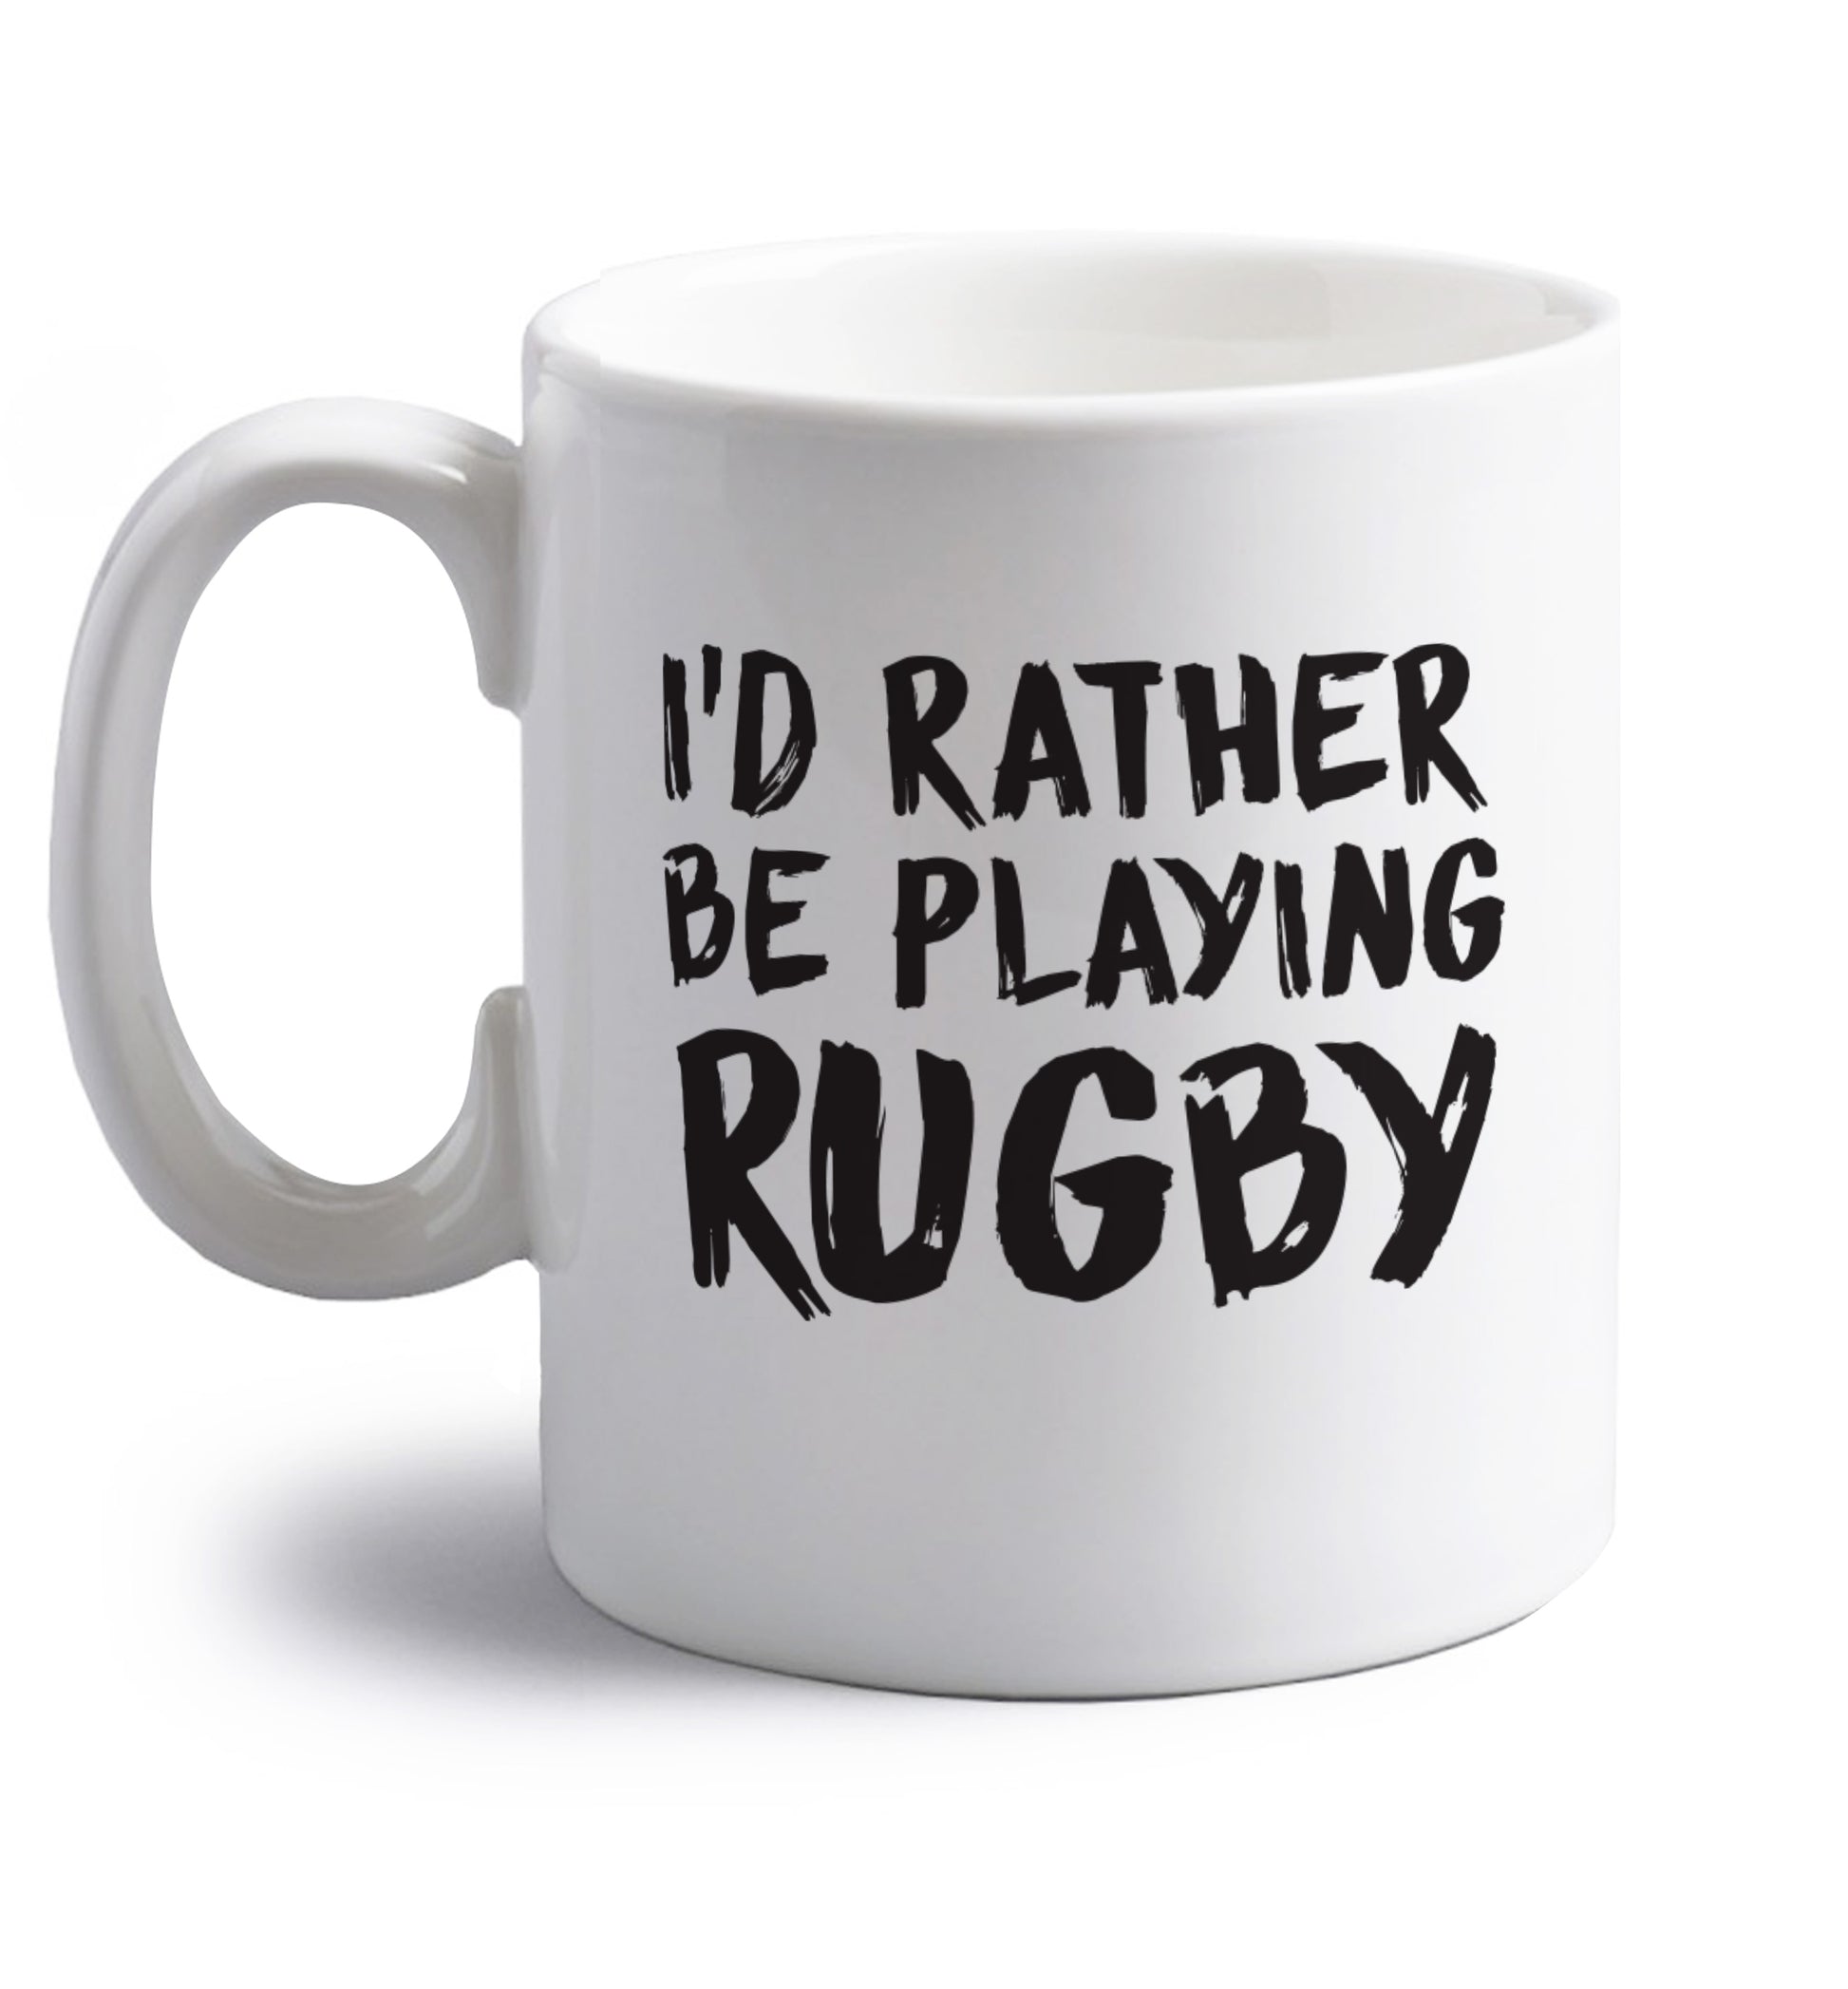 I'd rather be playing rugby right handed white ceramic mug 